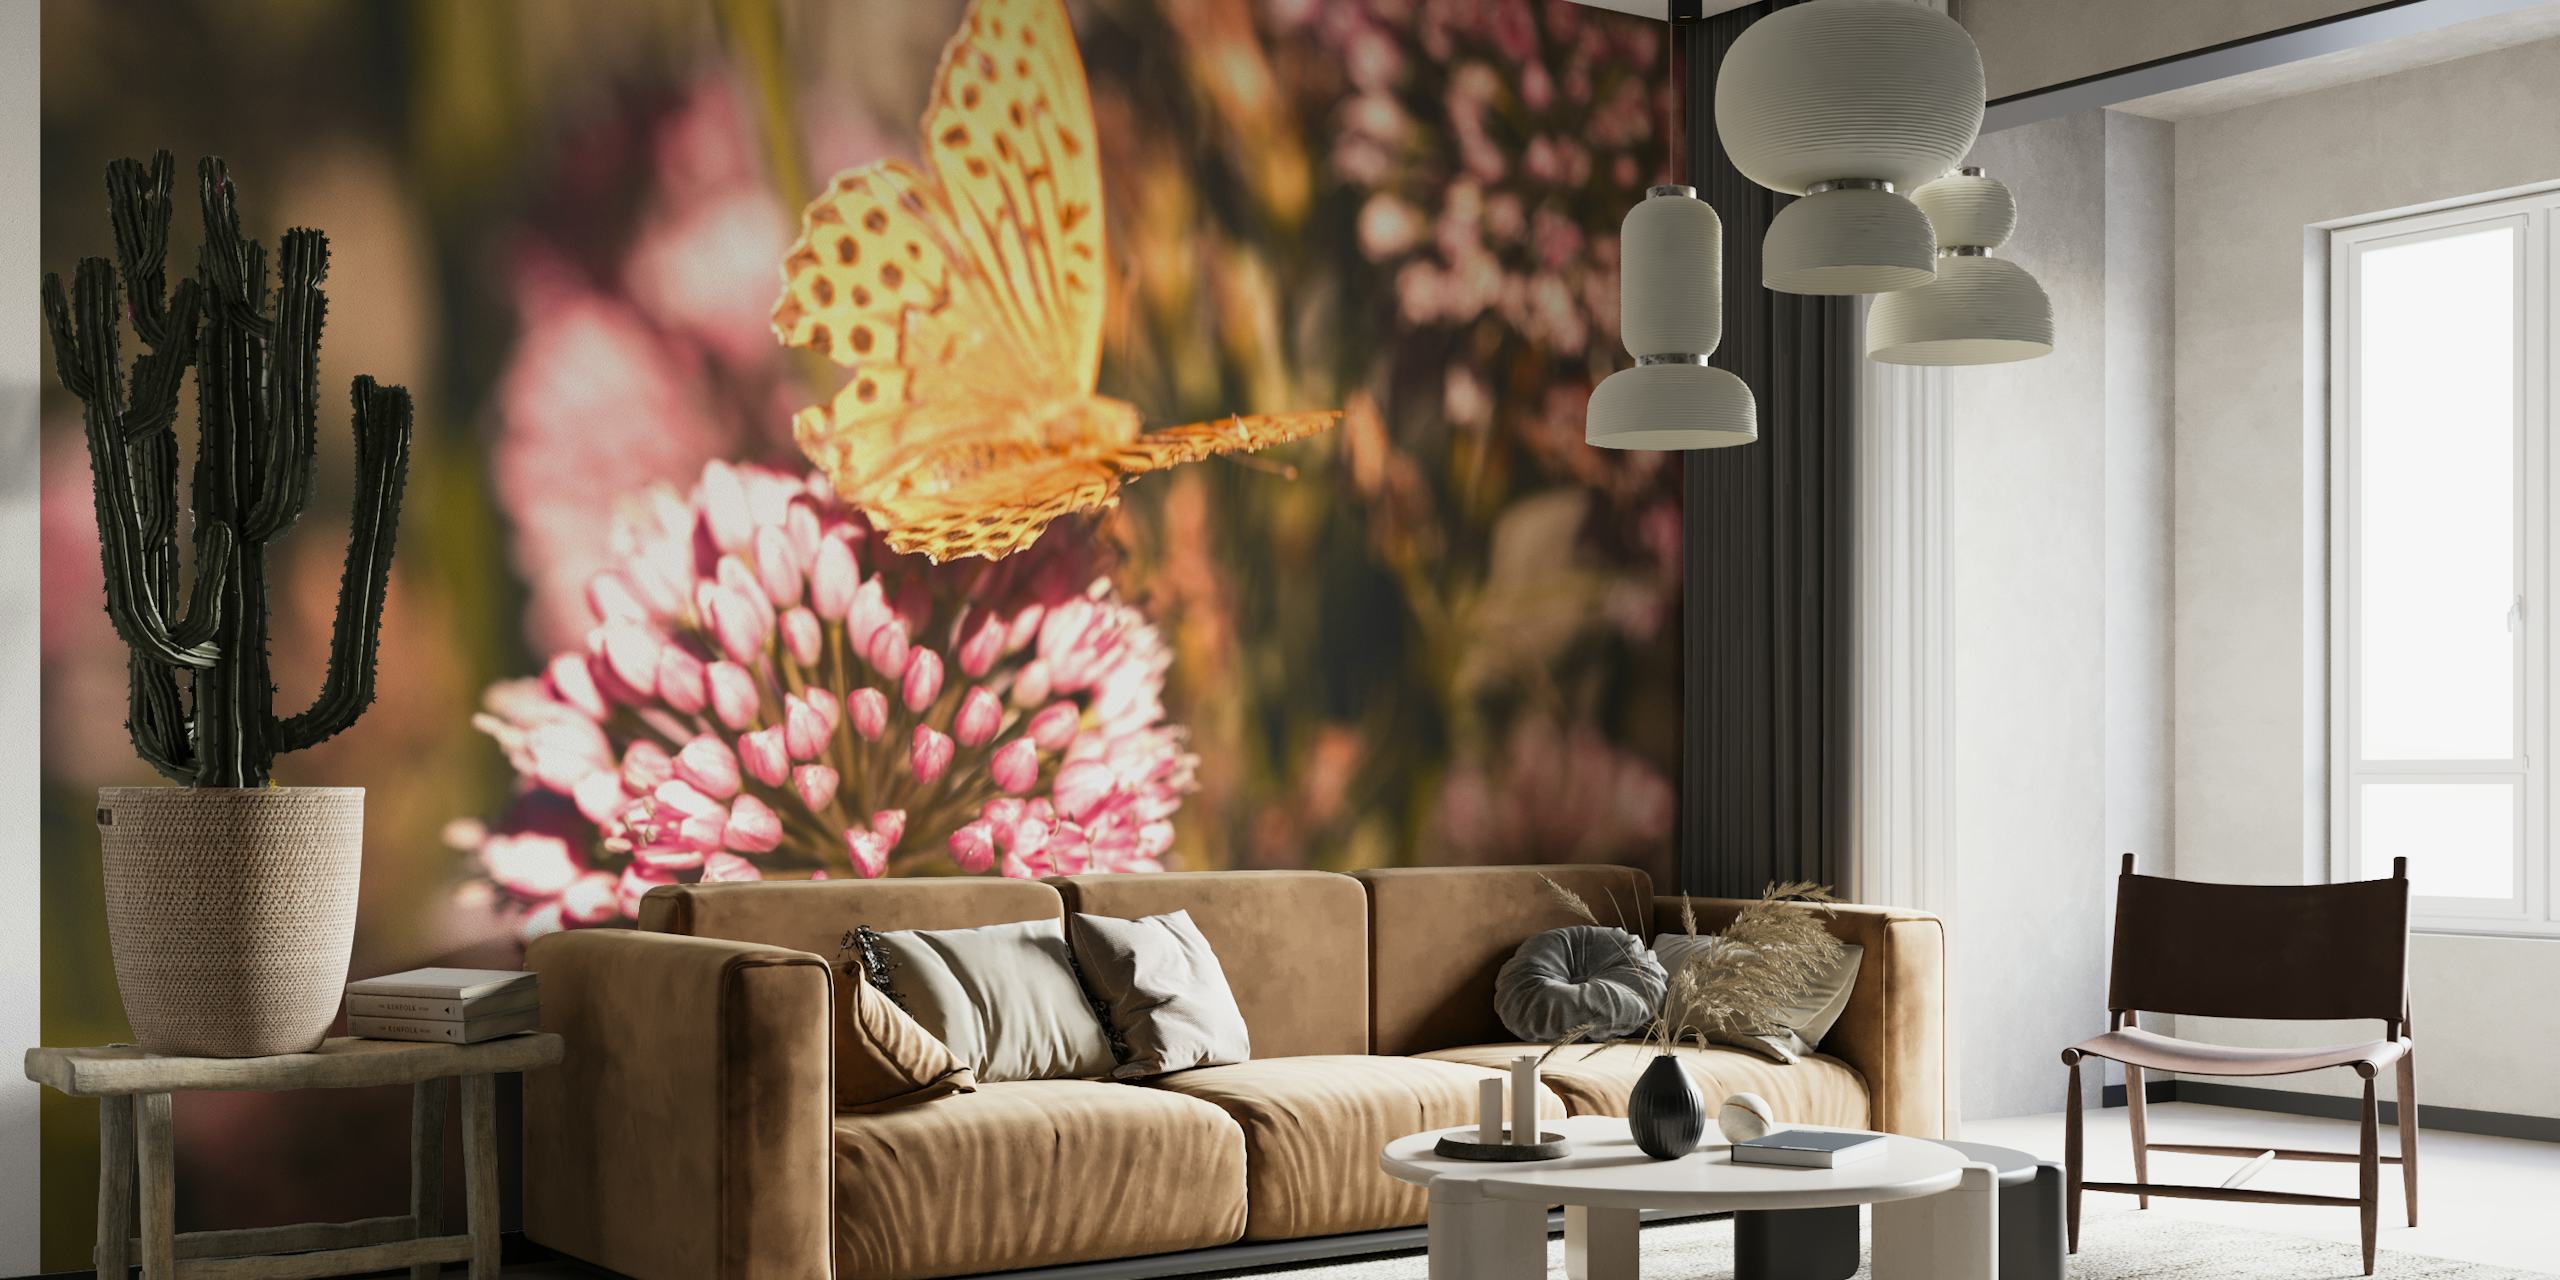 A butterfly perched on a flower, featuring in 'Butterfly at Work' wall mural.